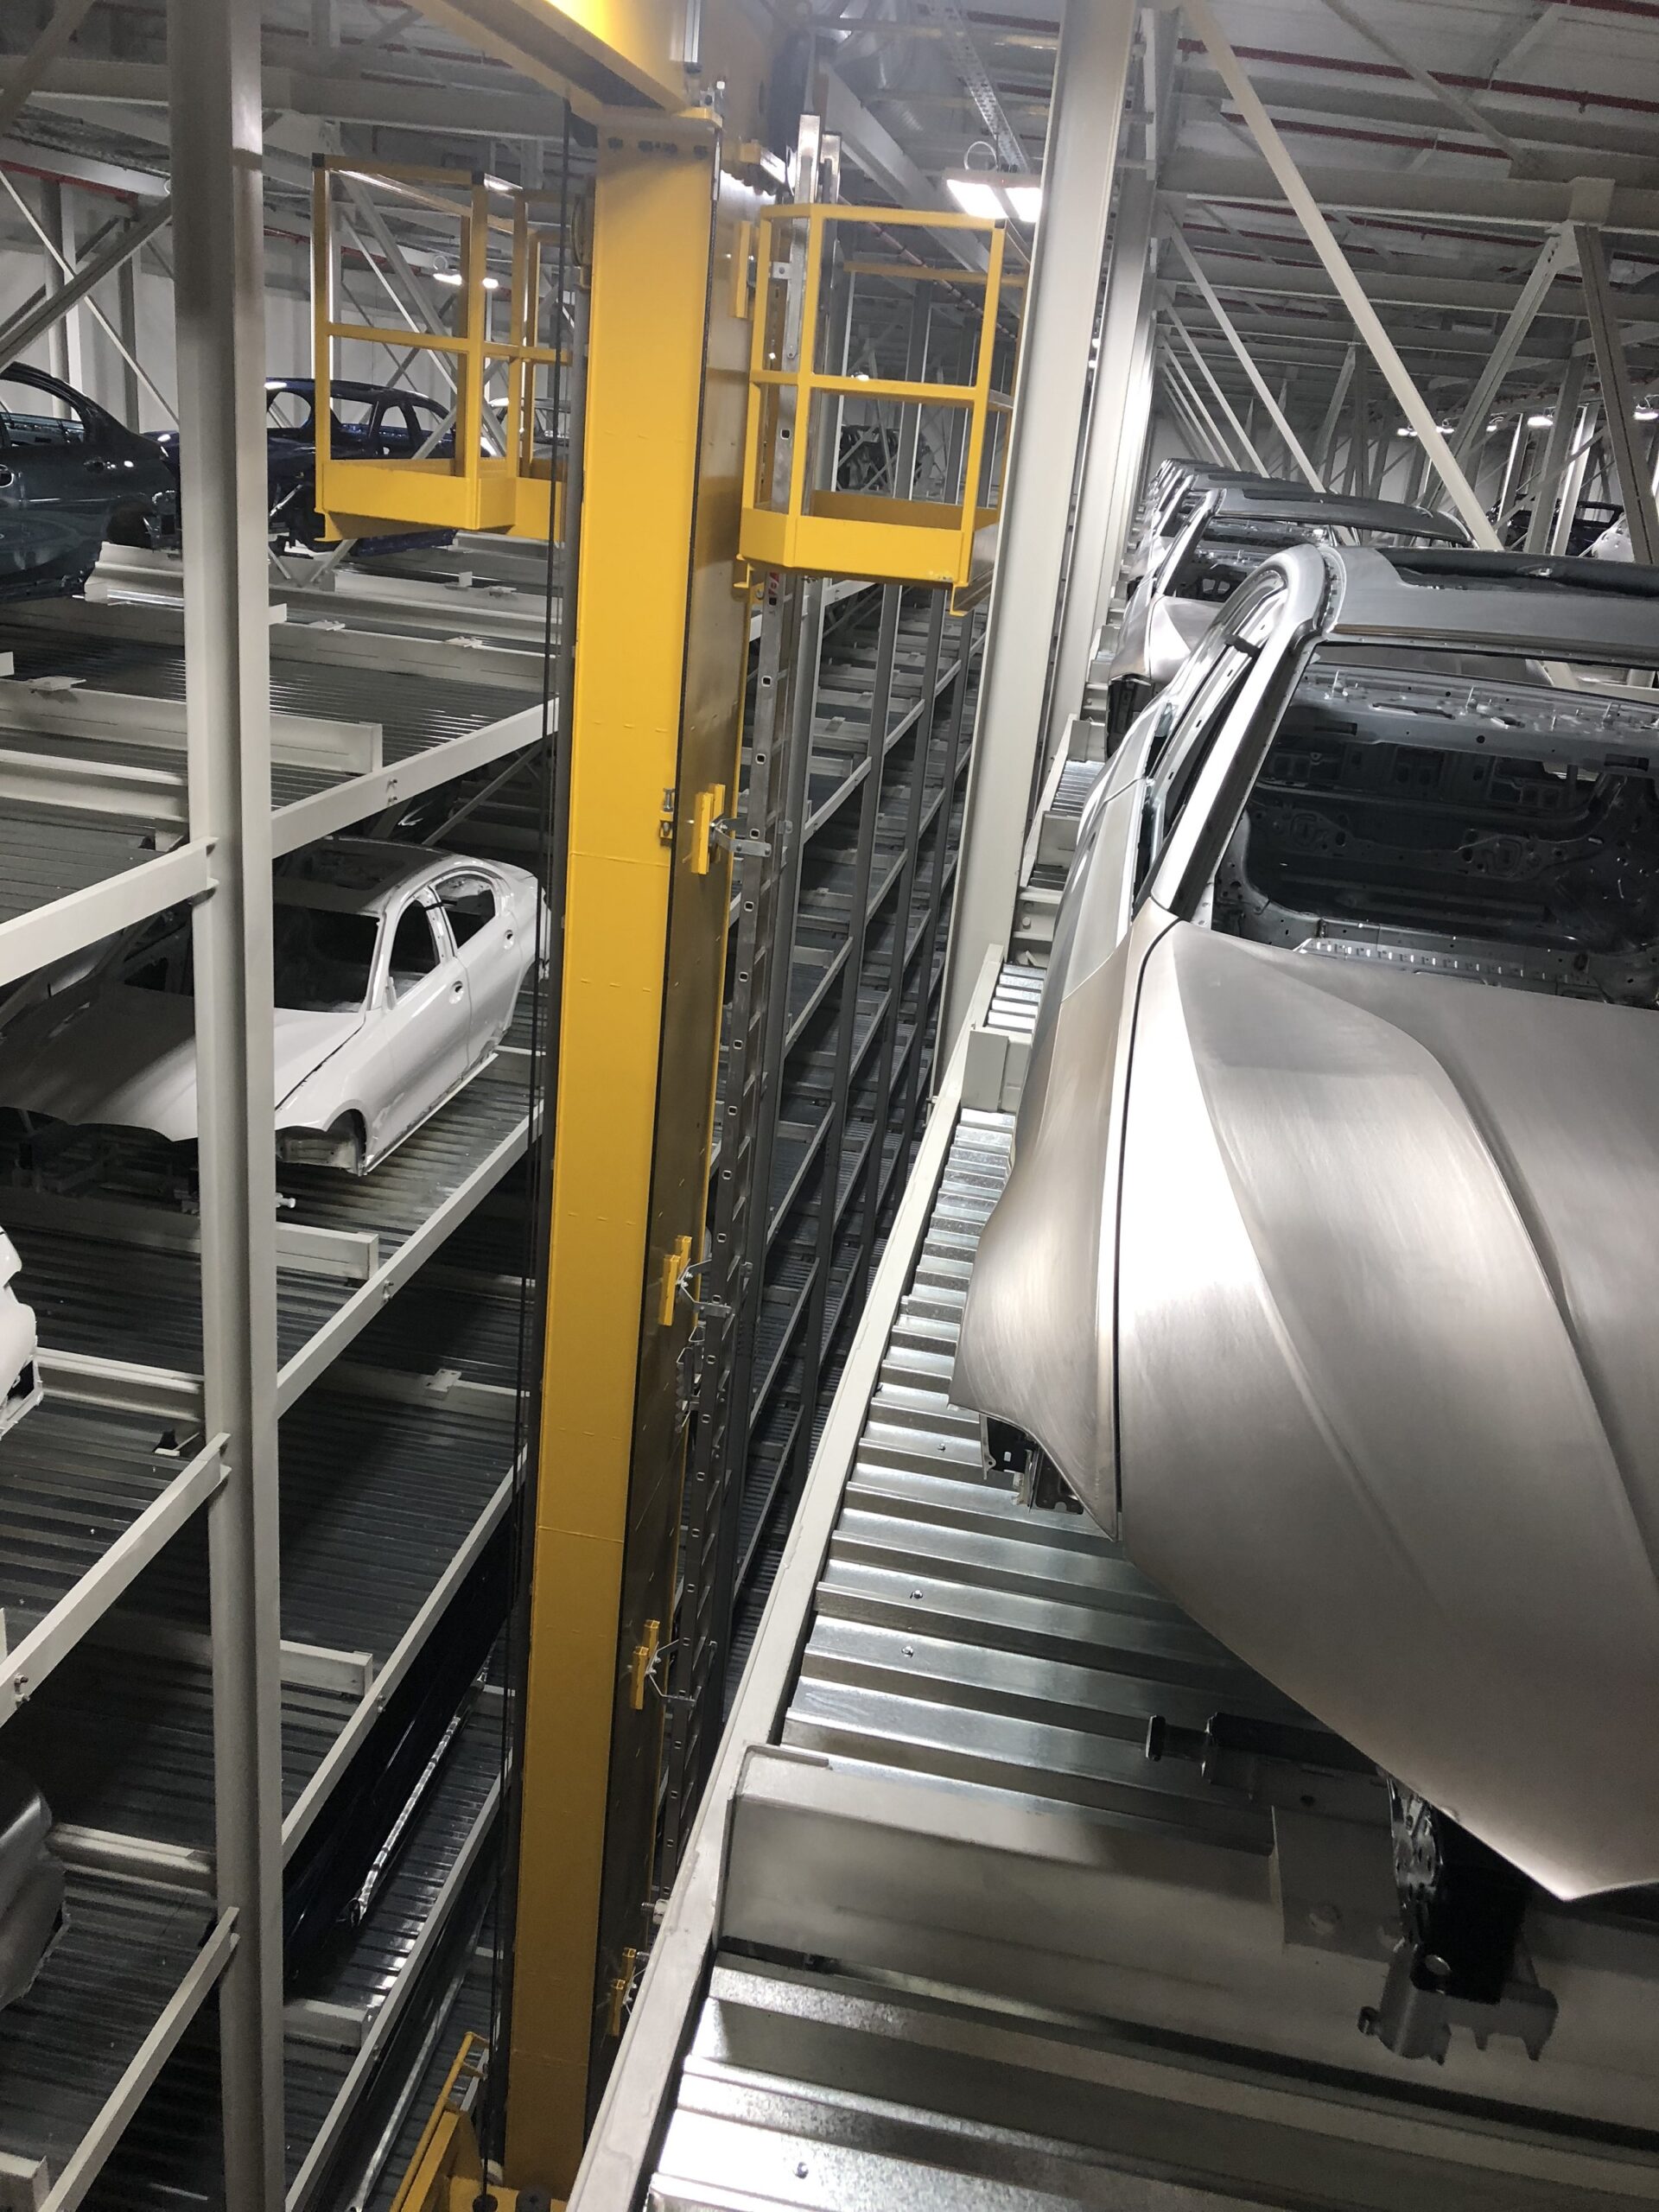 In the automotive sector, Lödige Industries saw strong demand for conveyor technology and automation programmes last year.